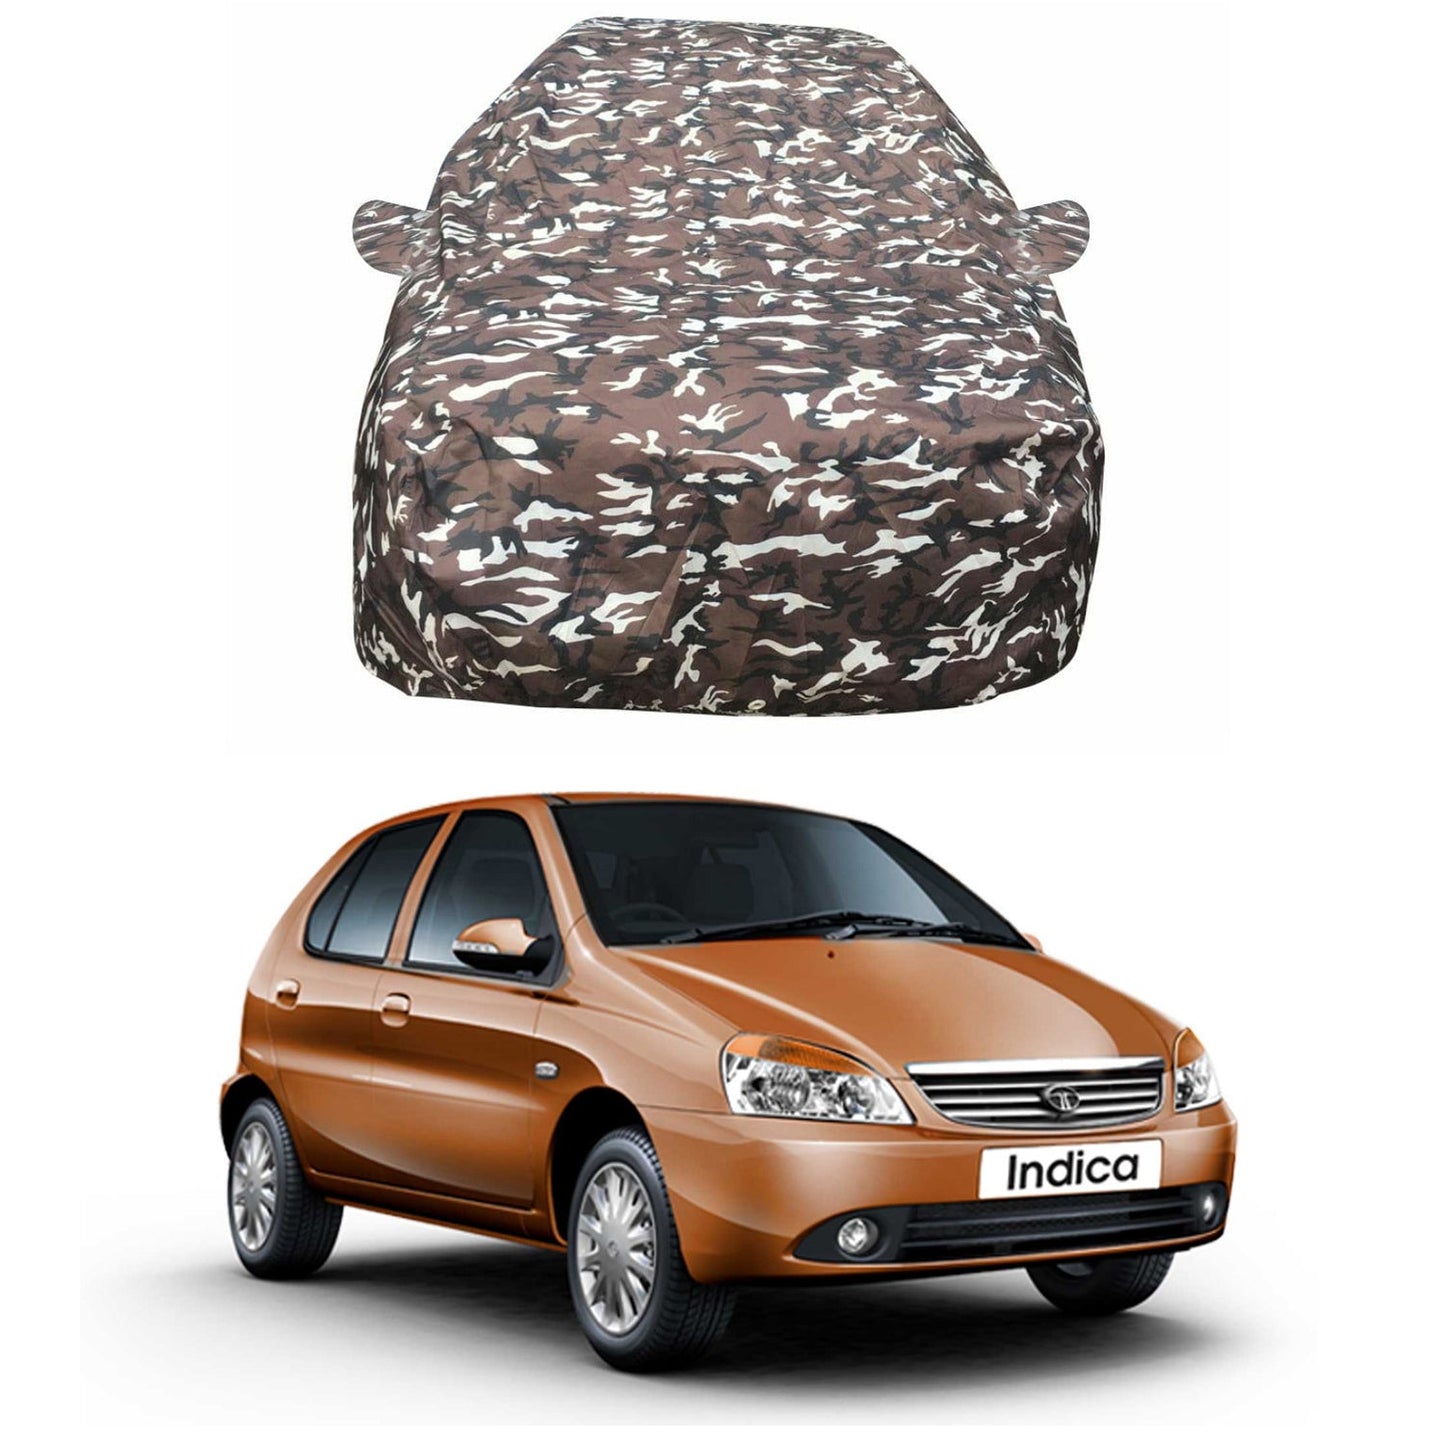 Oshotto Ranger Design Made of 100% Waterproof Fabric Multicolor Car Body Cover with Mirror Pocket For Tata Indica